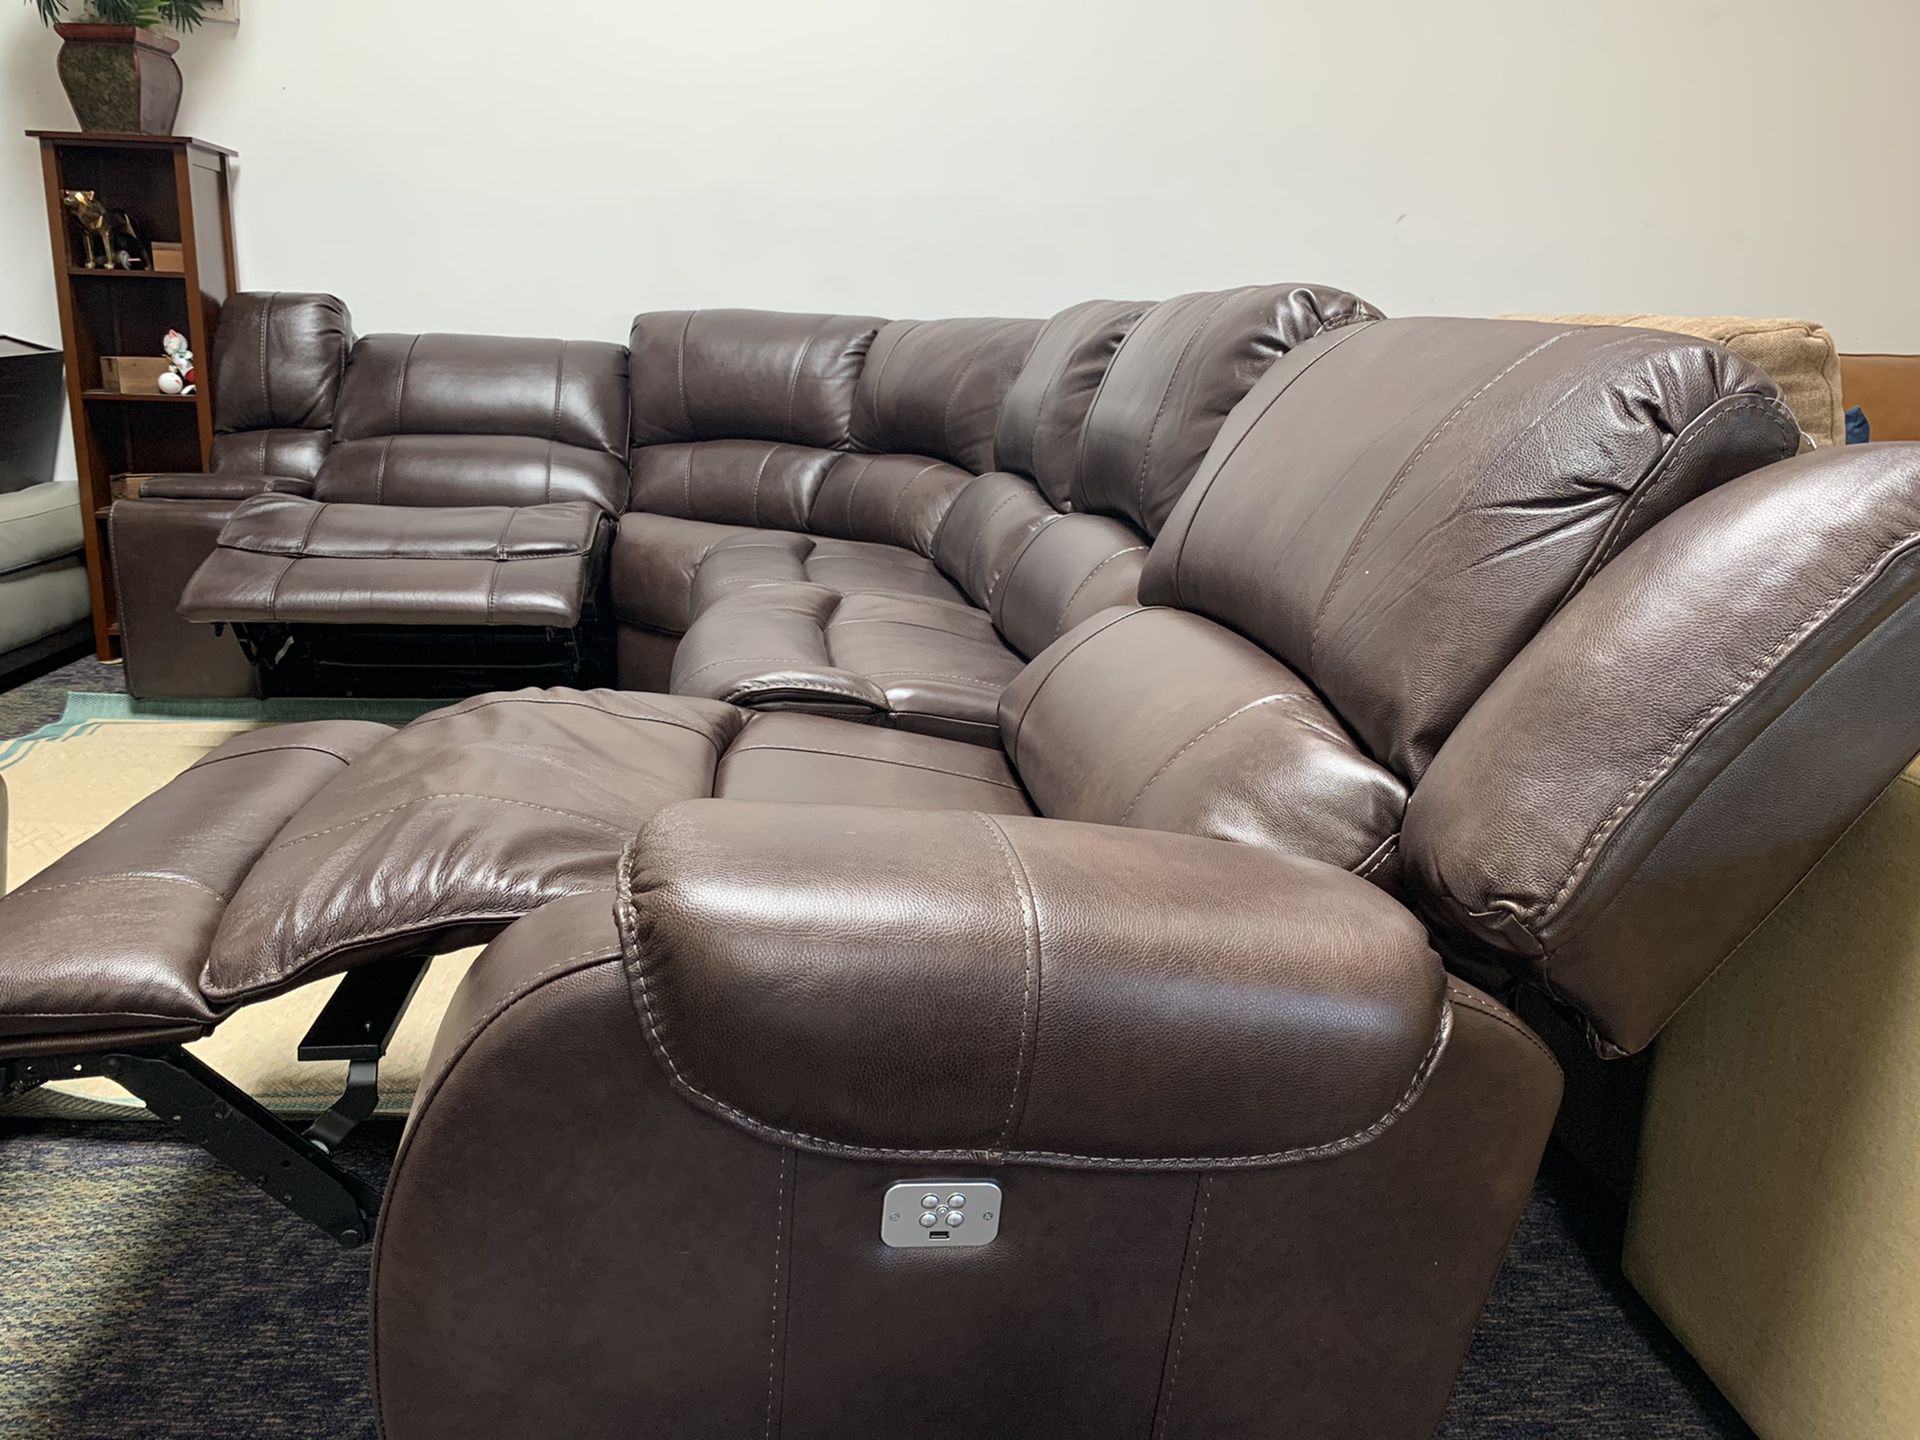 6 piece leather sectional couch with 2 power recliners and headrests